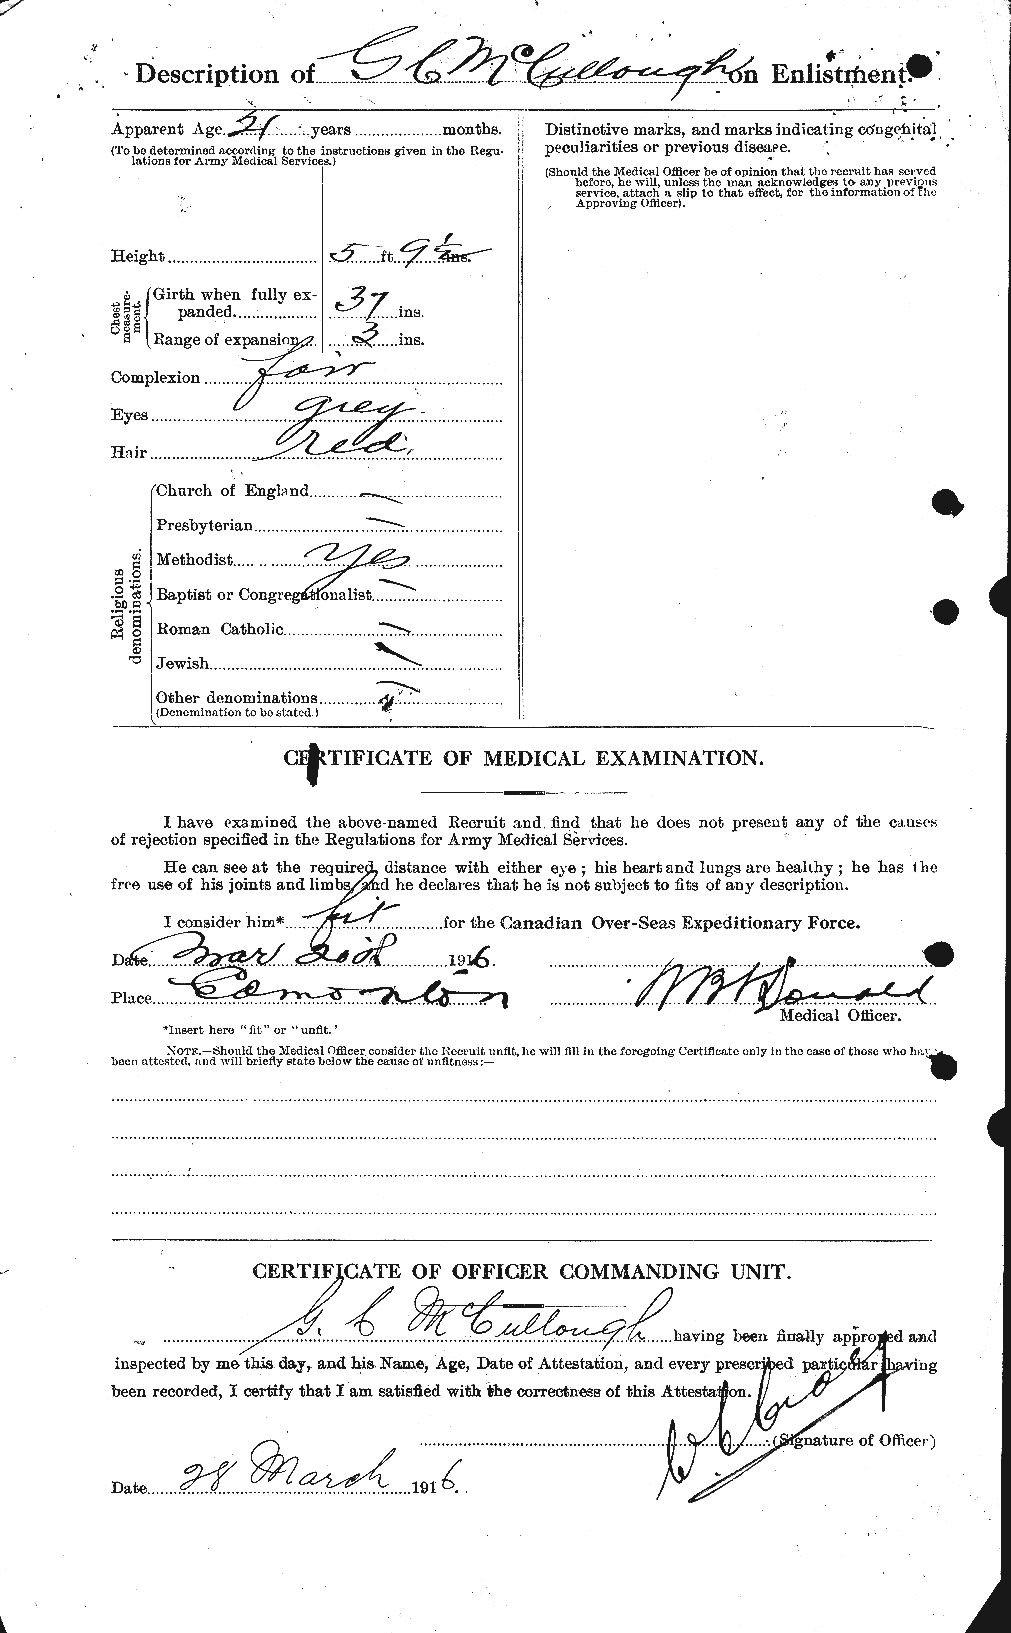 Personnel Records of the First World War - CEF 136947b